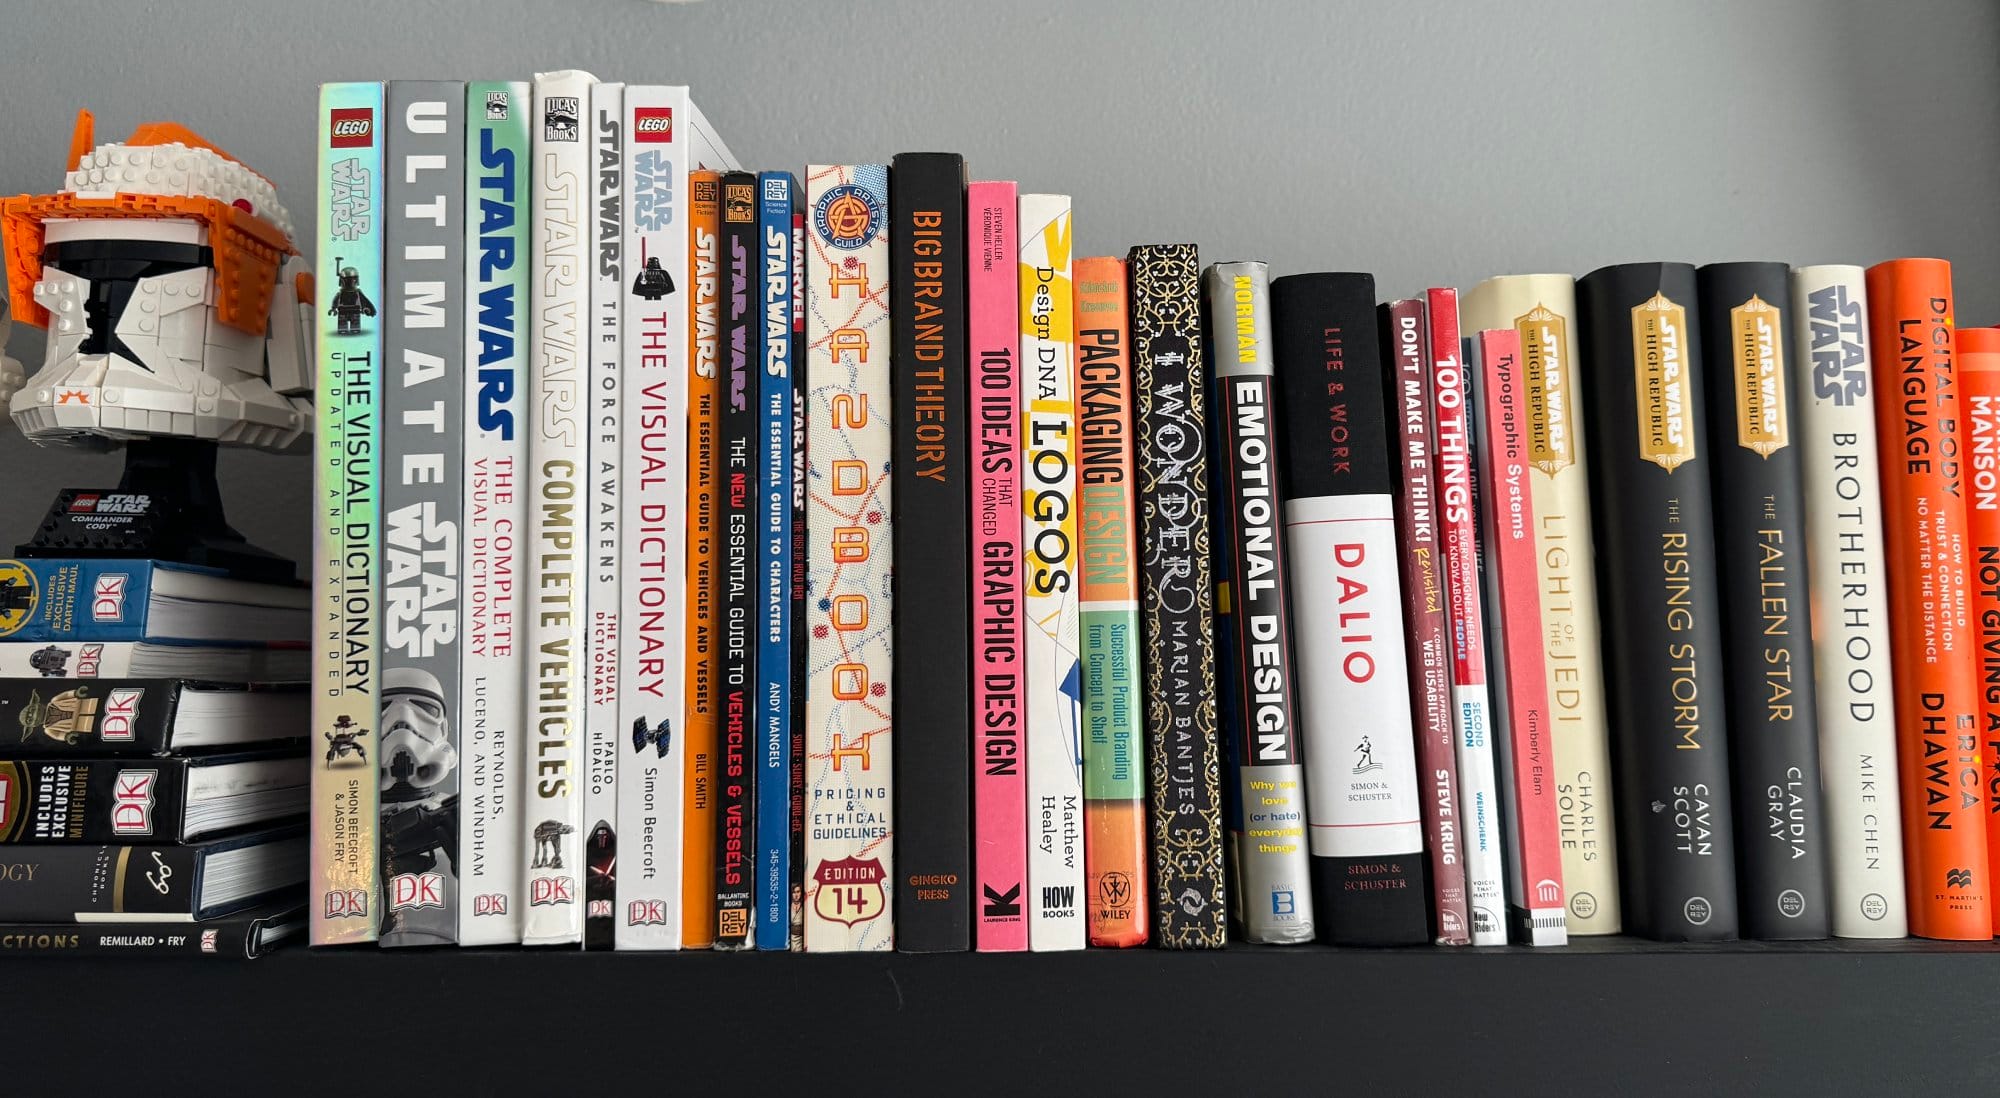 A shelf holding a variety of books primarily focused on Star Wars, design, and graphic arts, along with a LEGO Star Wars helmet model to the left